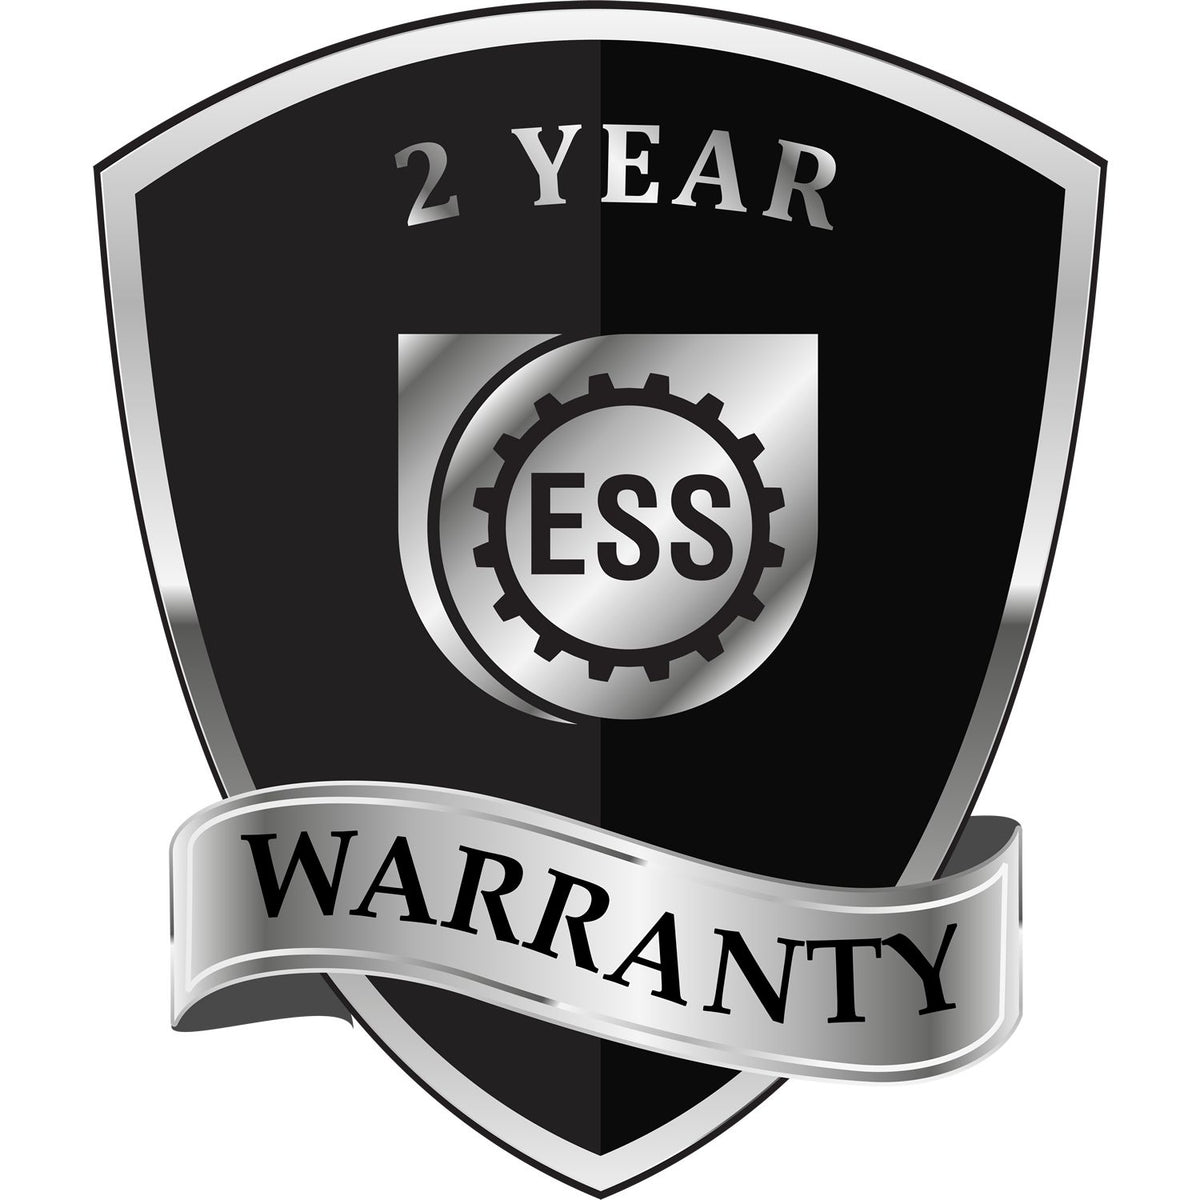 A black and silver badge or emblem showing warranty information for the State of Florida Extended Long Reach Geologist Seal